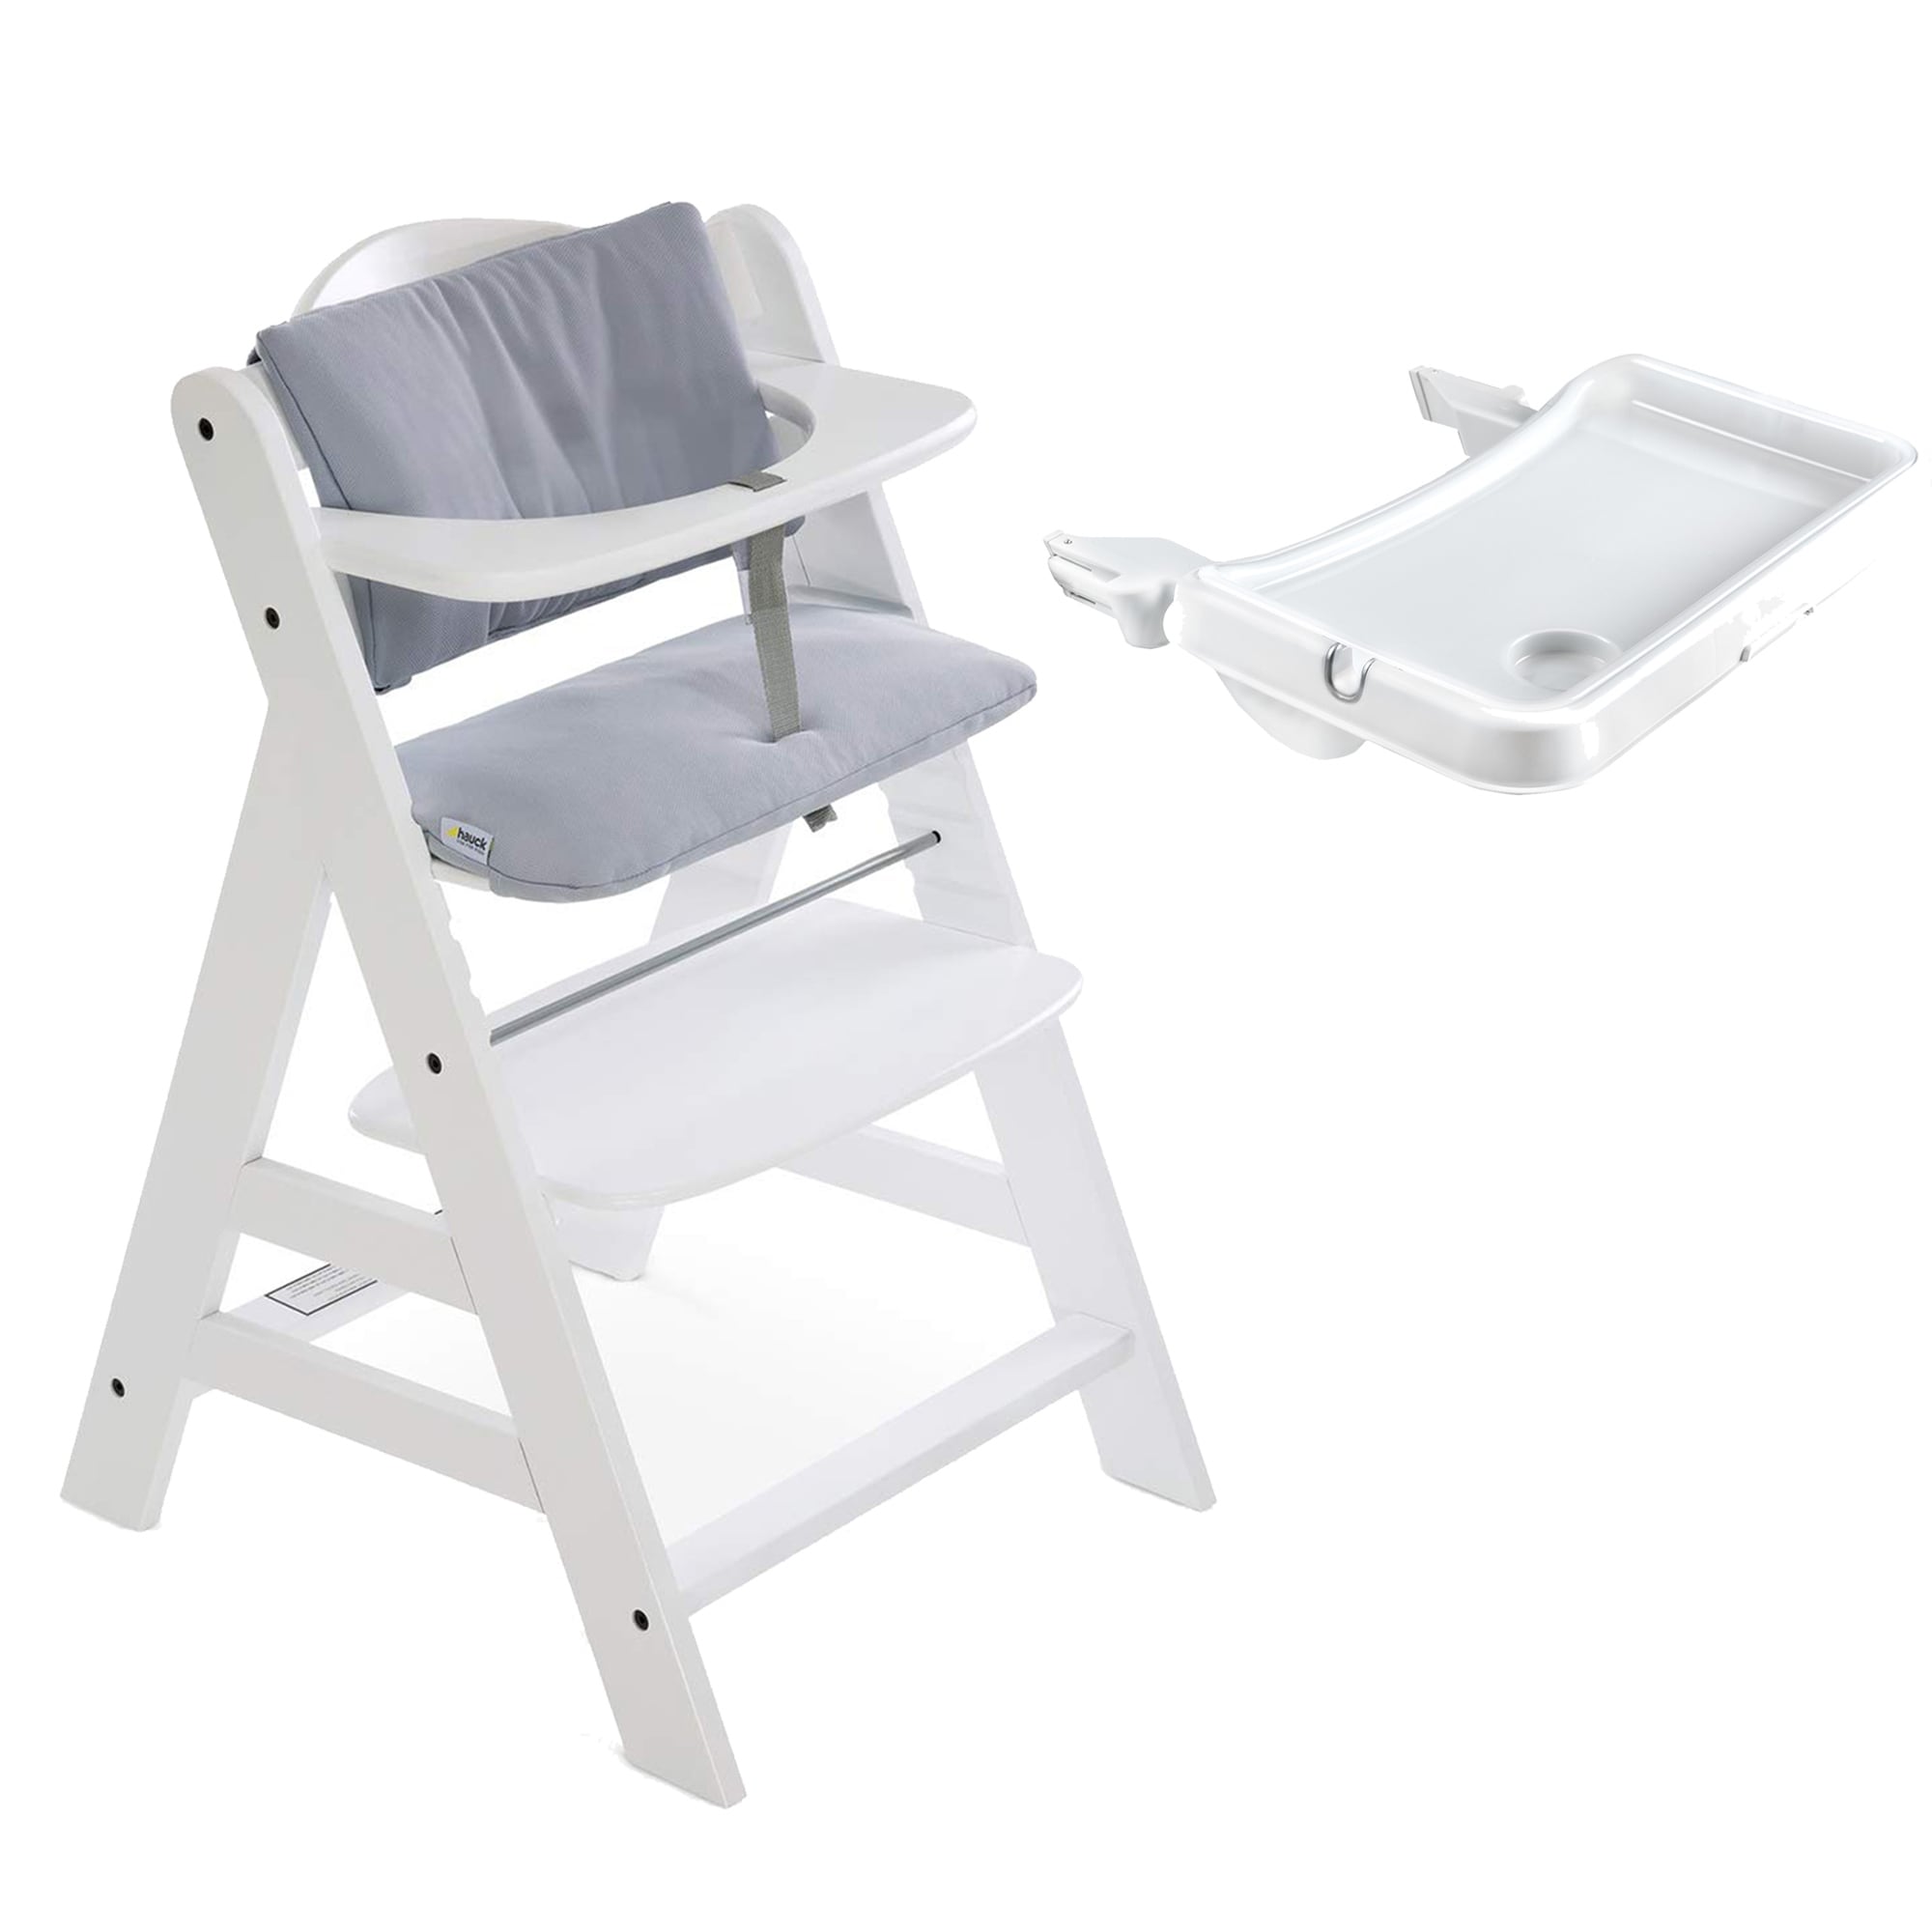 hauck Alpha+/Beta+ High Chair Tray Table, White & Deluxe Seat Cushion Pad, Grey - 5.17